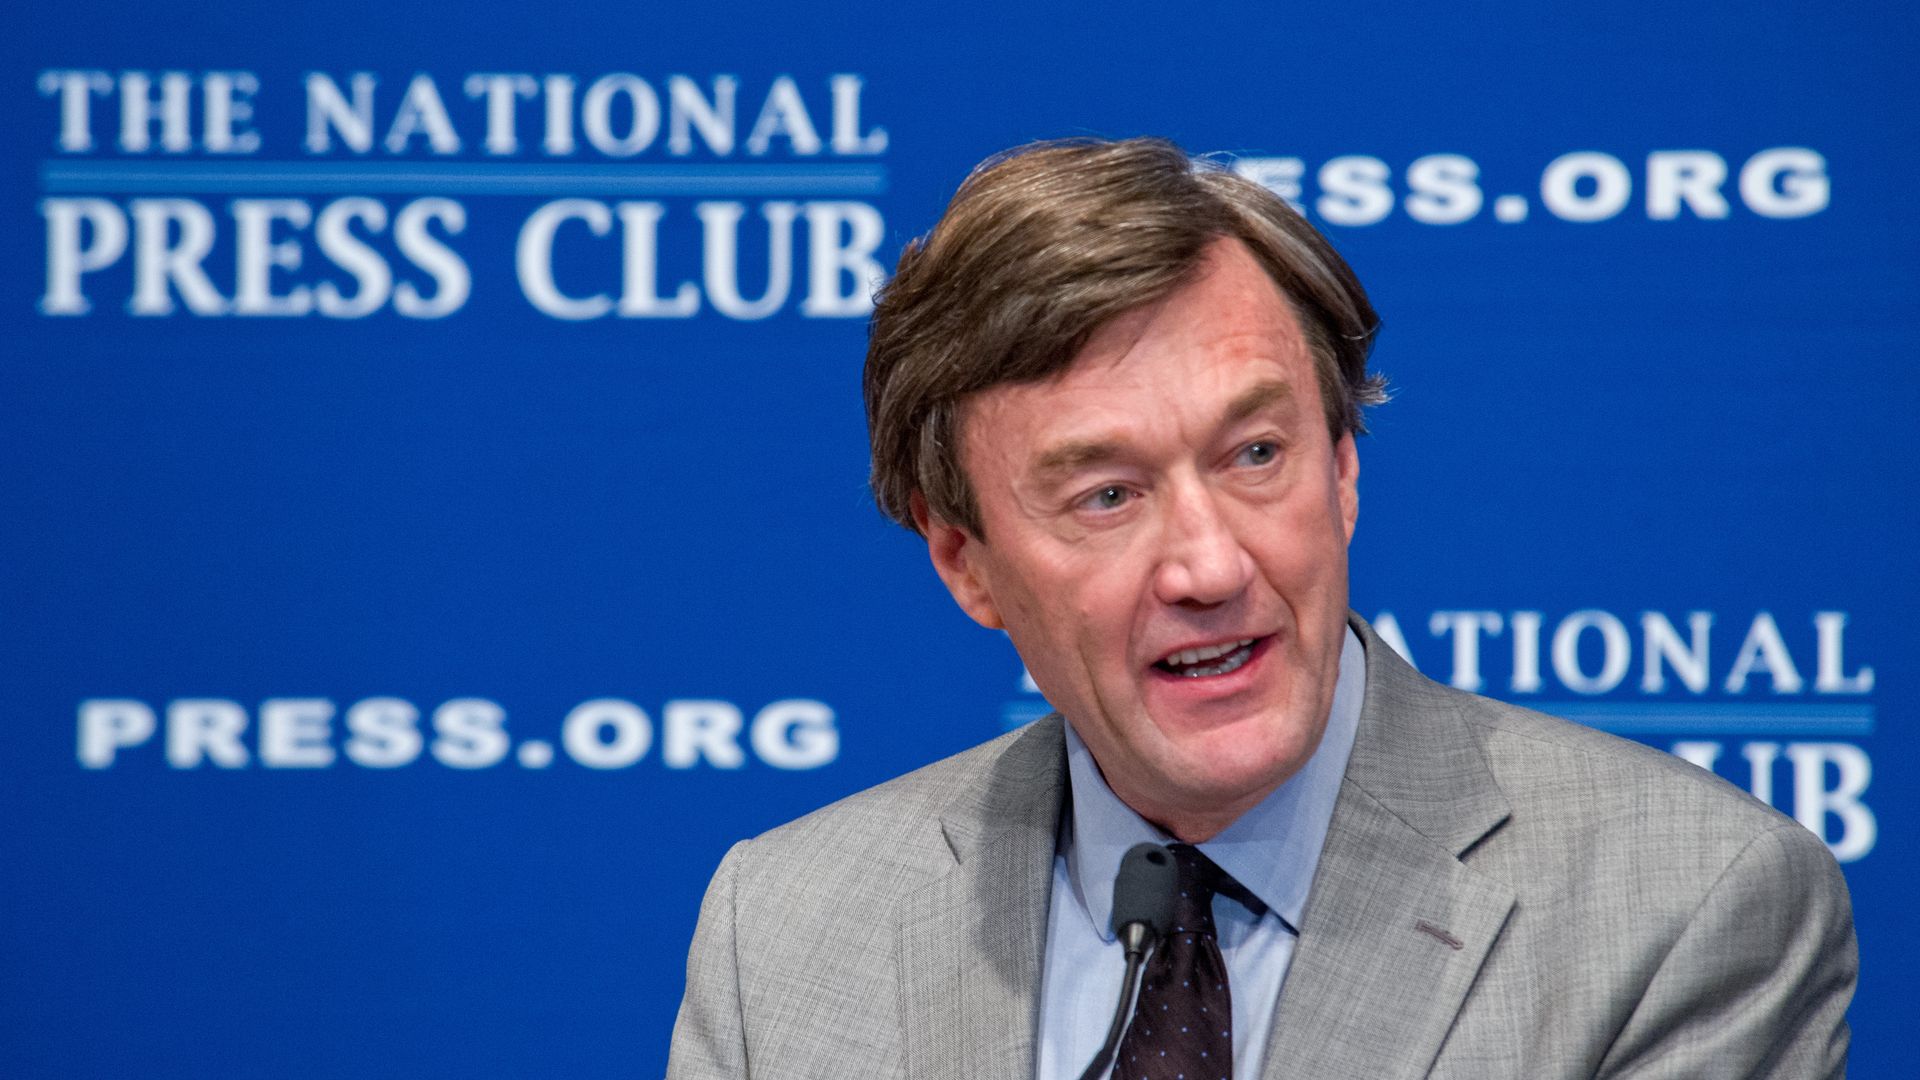 Mayo Clinic CEO John Noseworthy speaks at an event.